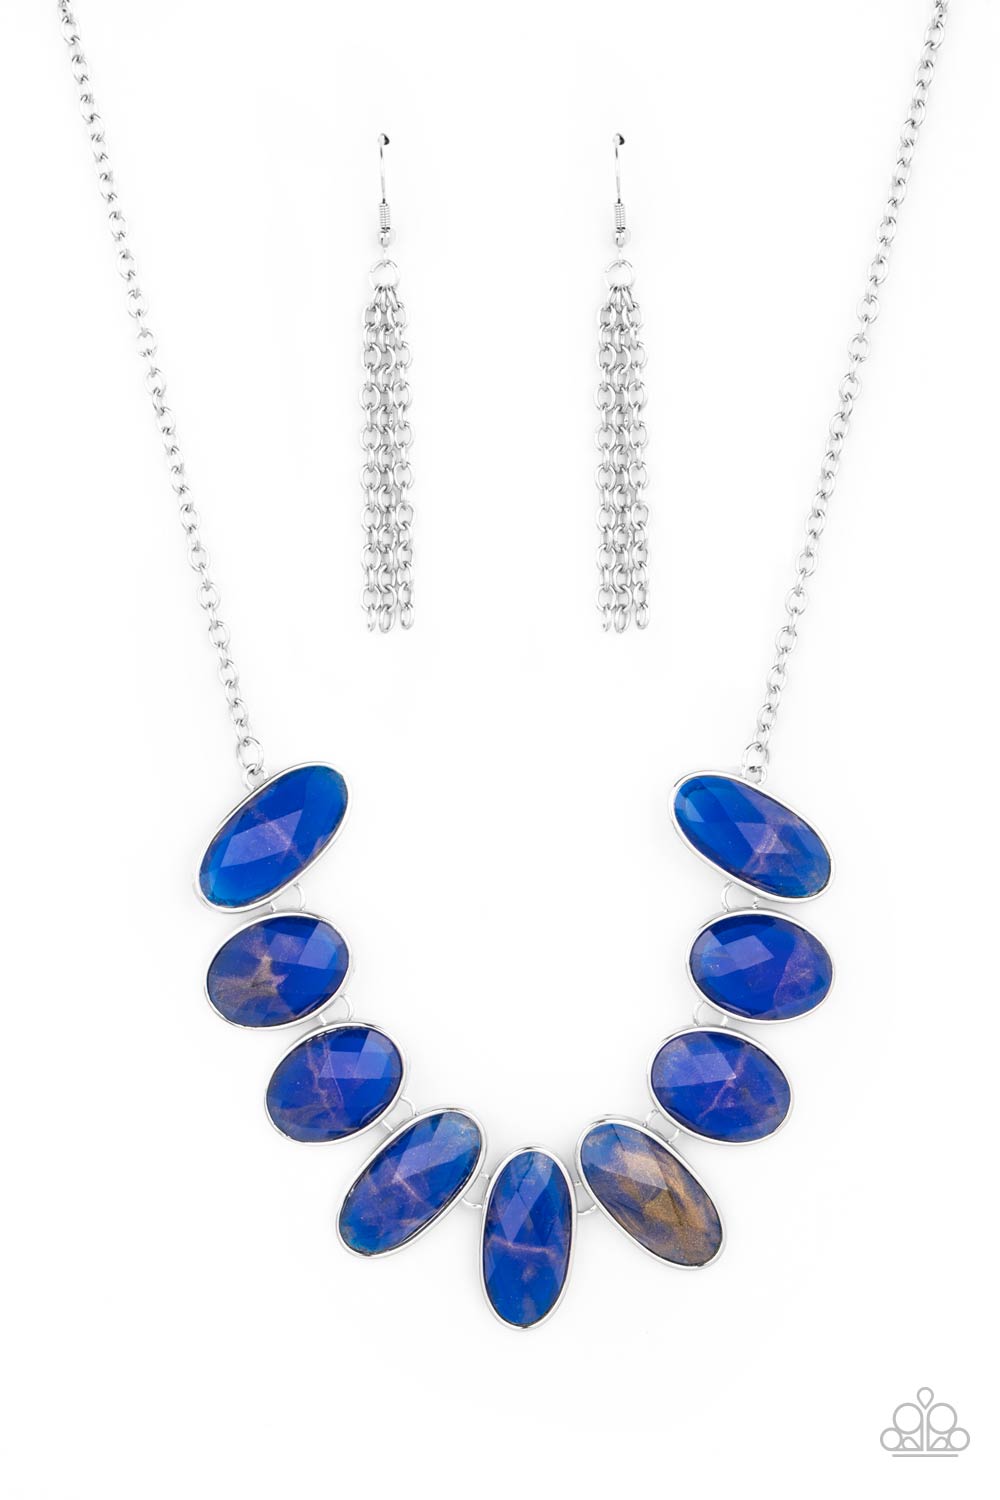 Elliptical Episode Blue Necklace - Paparazzi Accessories  Generous bright blue glassy gems, dusted in shimmery gold, lay in silver oval frames and link across the collar creating a glimmering statement. Features an adjustable clasp closure.  All Paparazzi Accessories are lead free and nickel free!   Sold as one individual necklace. Includes one pair of matching earrings.